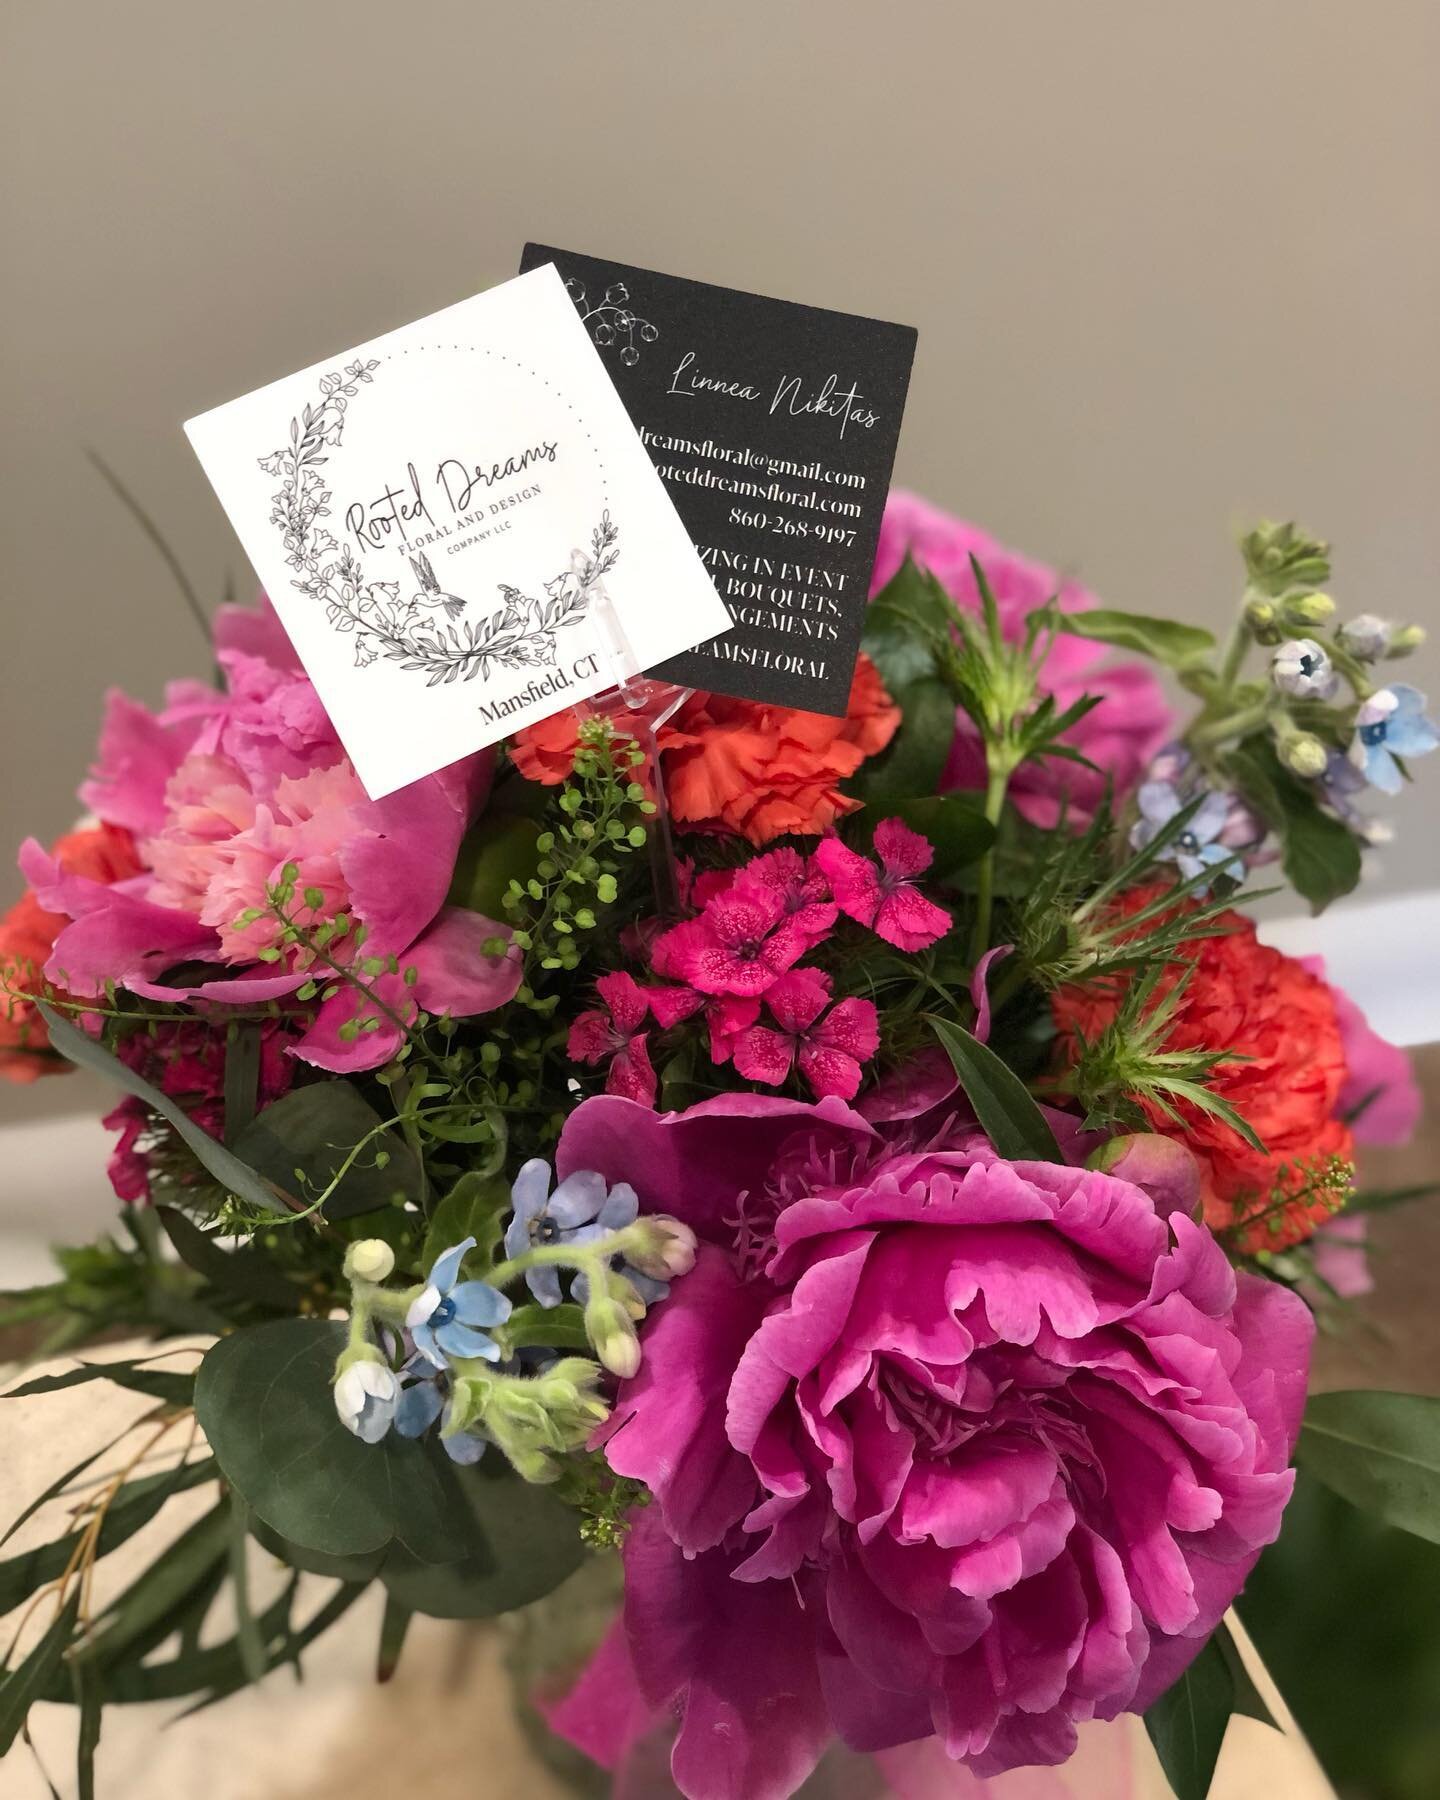 We love our bi weekly flower deliveries from @rooted_dreams_floral 🌸

We can&rsquo;t say enough about her custom bouquets! 

#supportsmallbusiness #supportlocal #floral #lovewhatyoudo #signaturesalonct